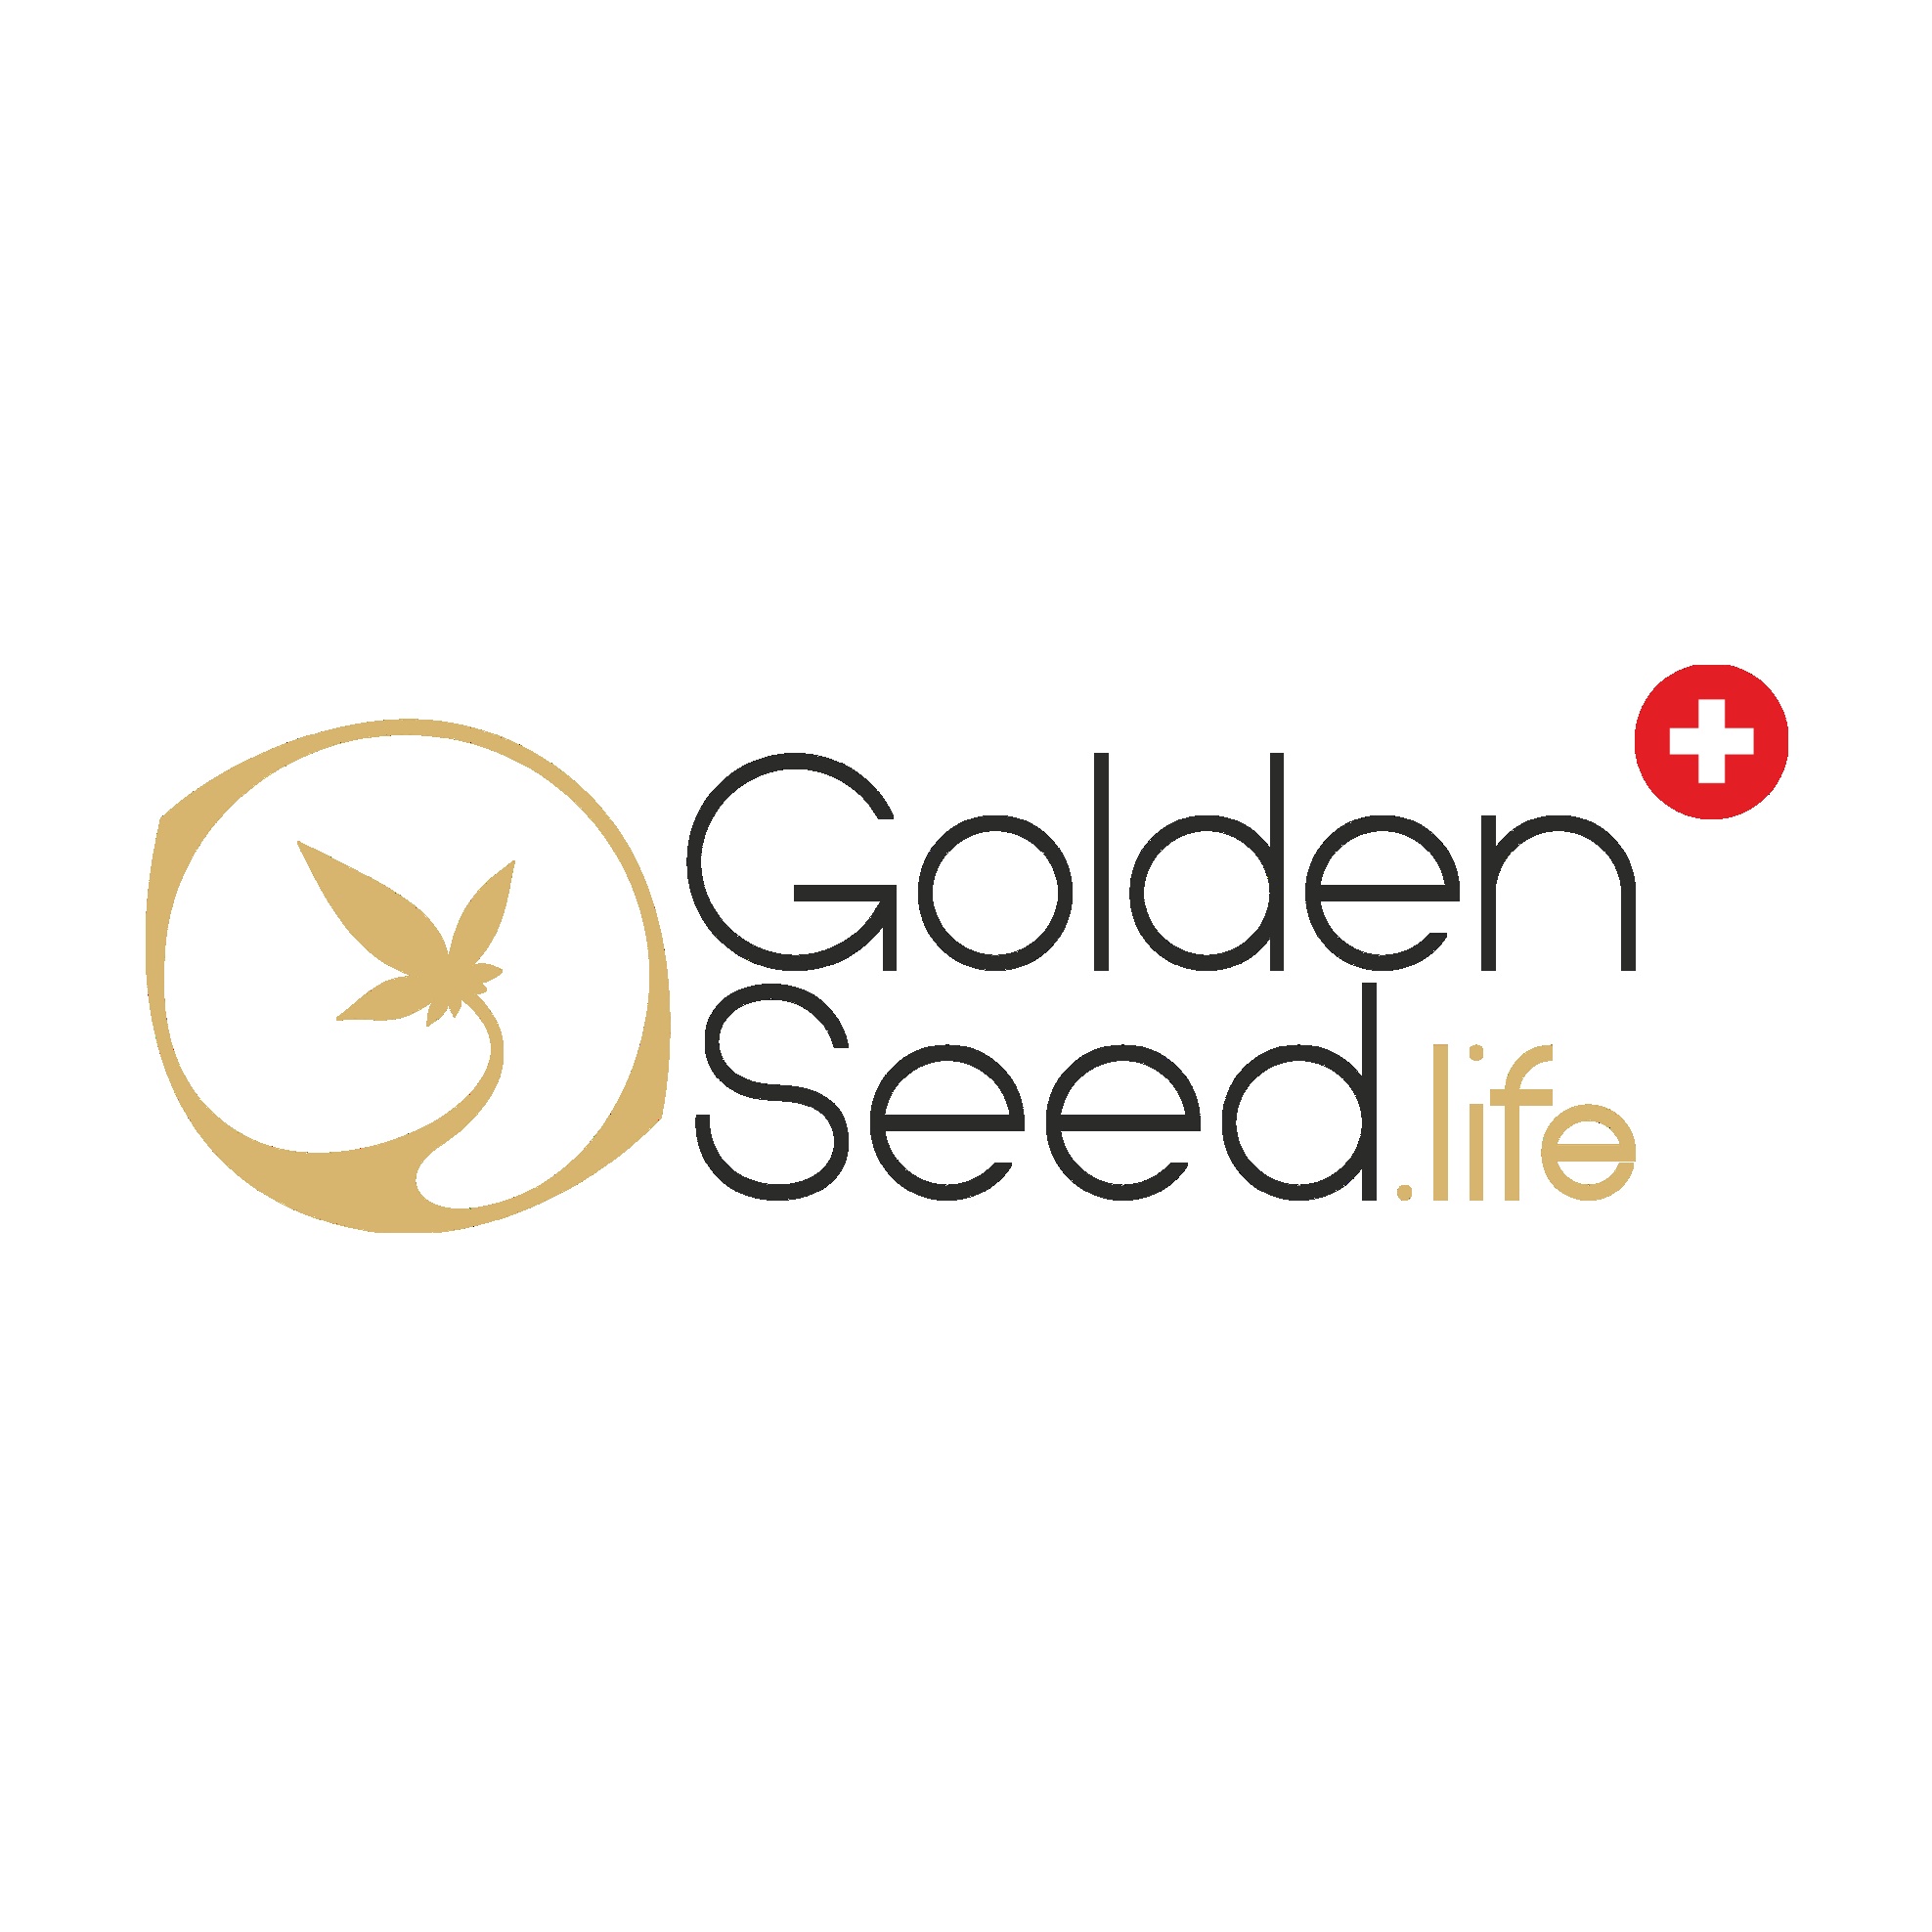 GoldenSeed.life